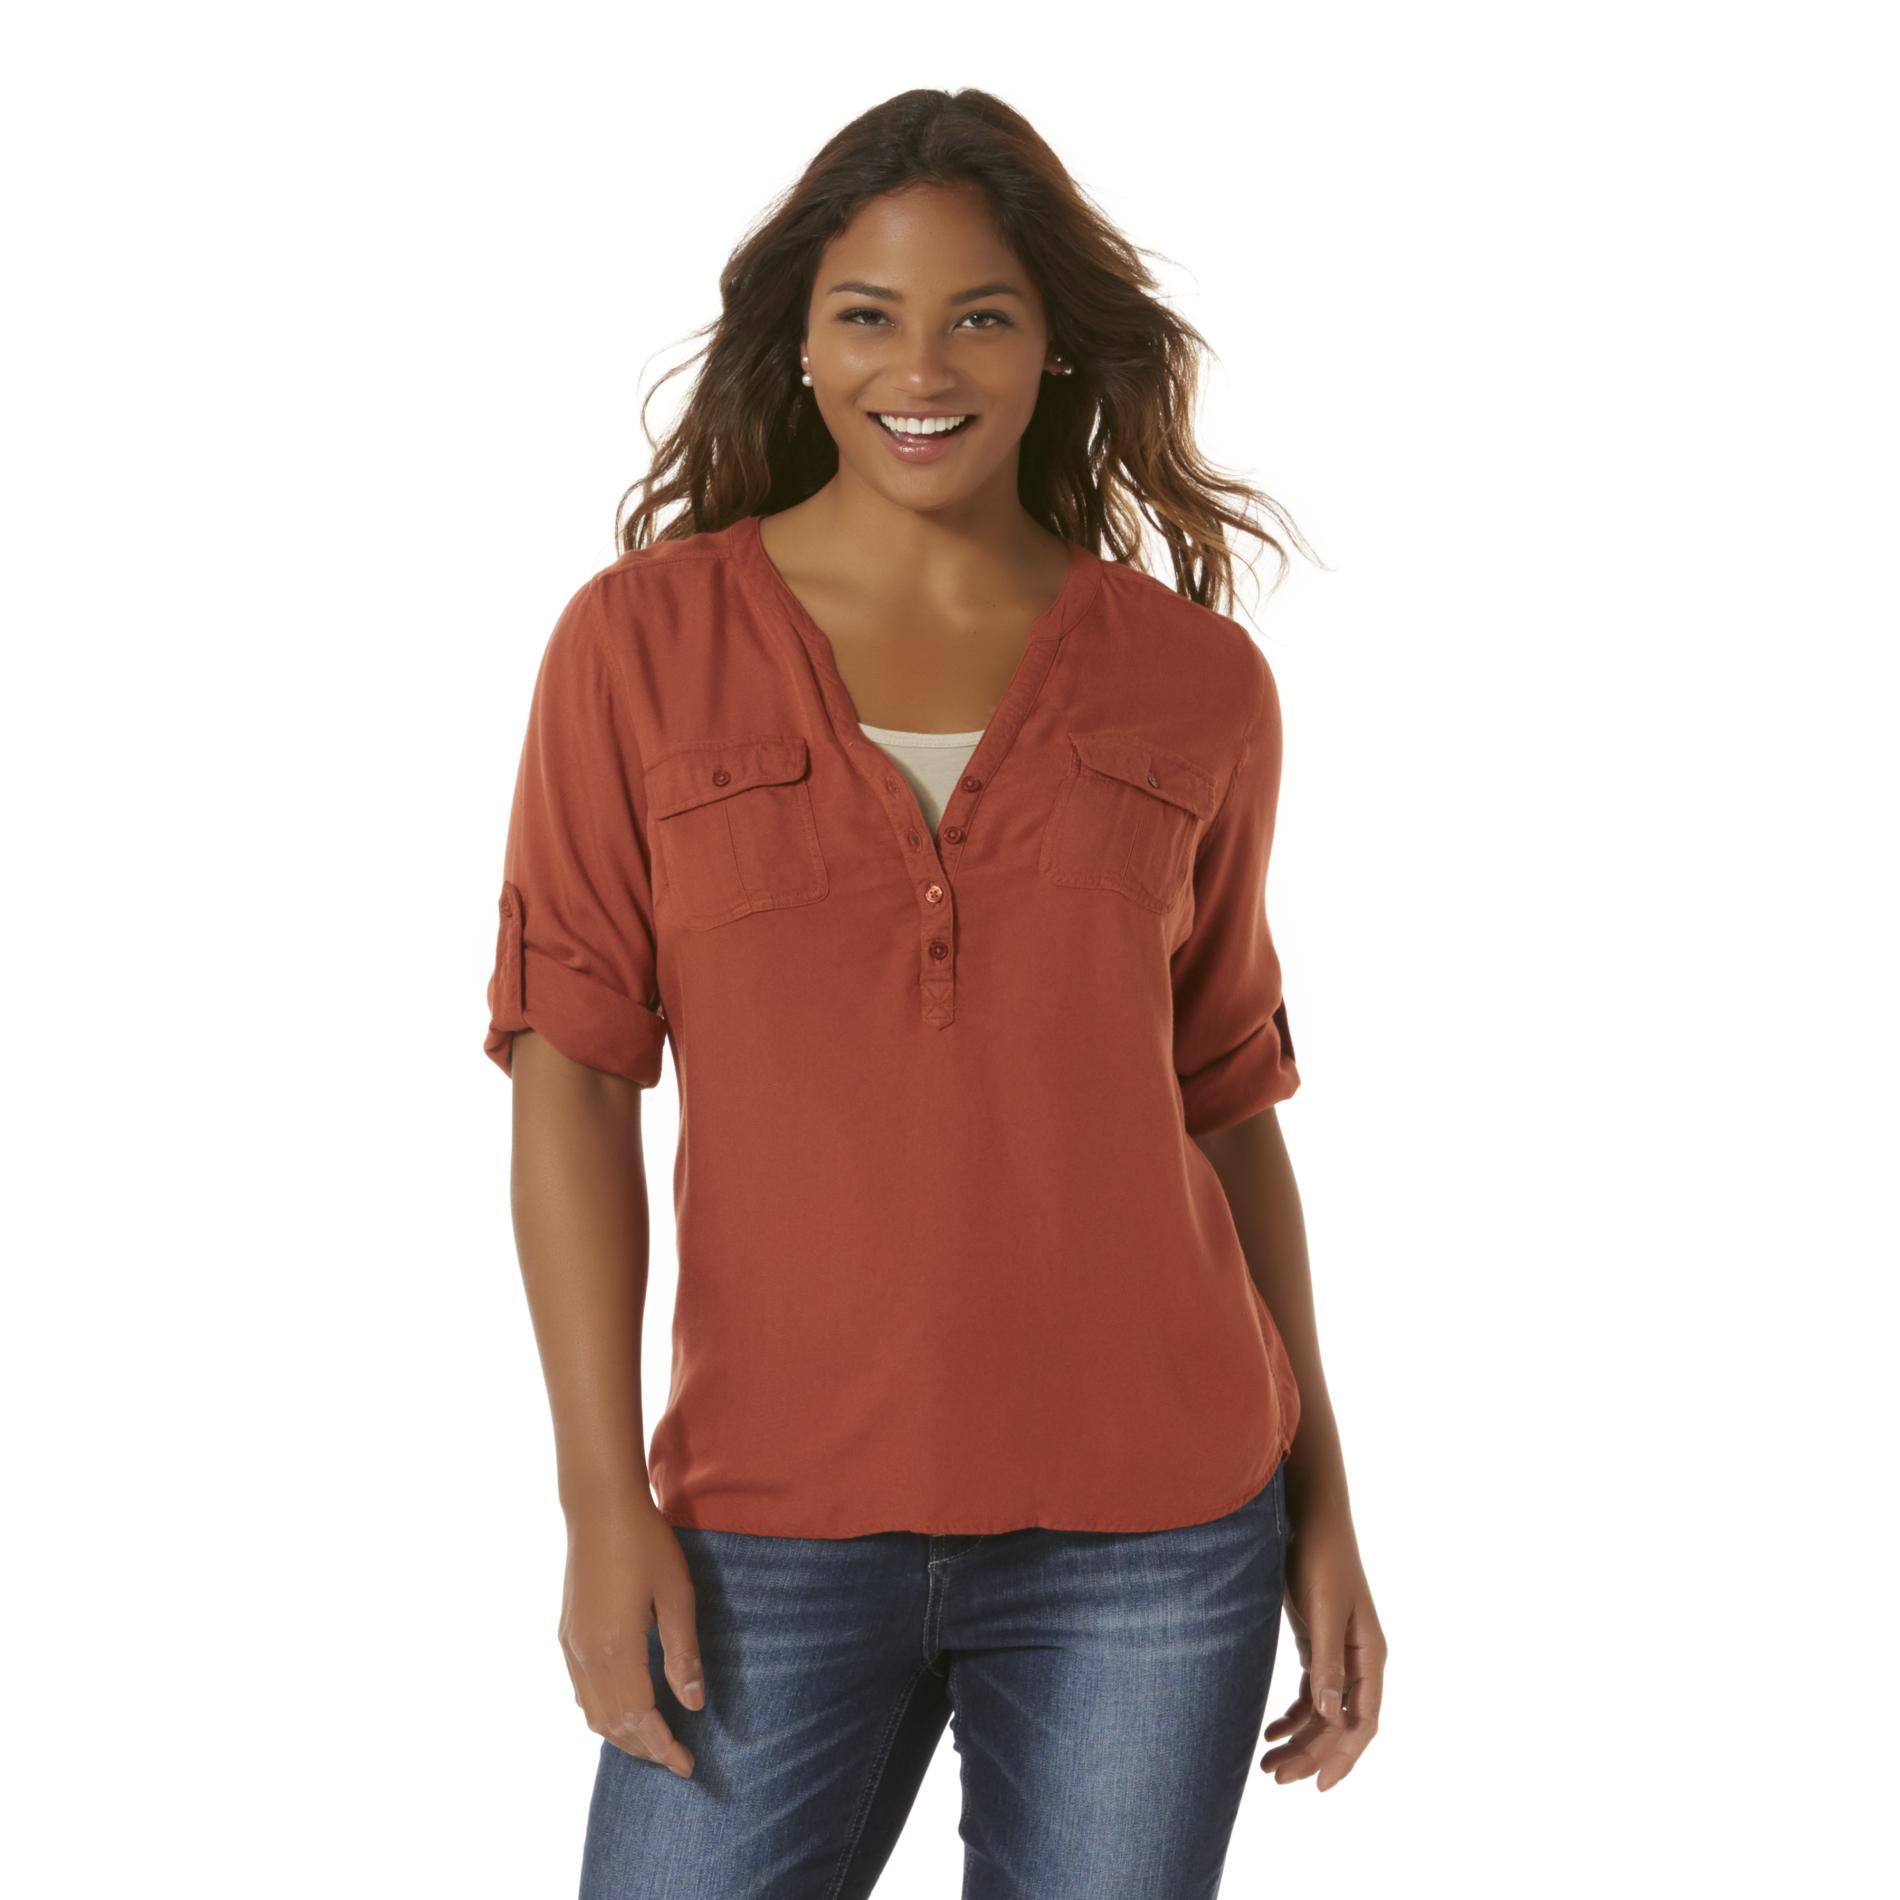 Simply Styled Women's Woven Henley Top